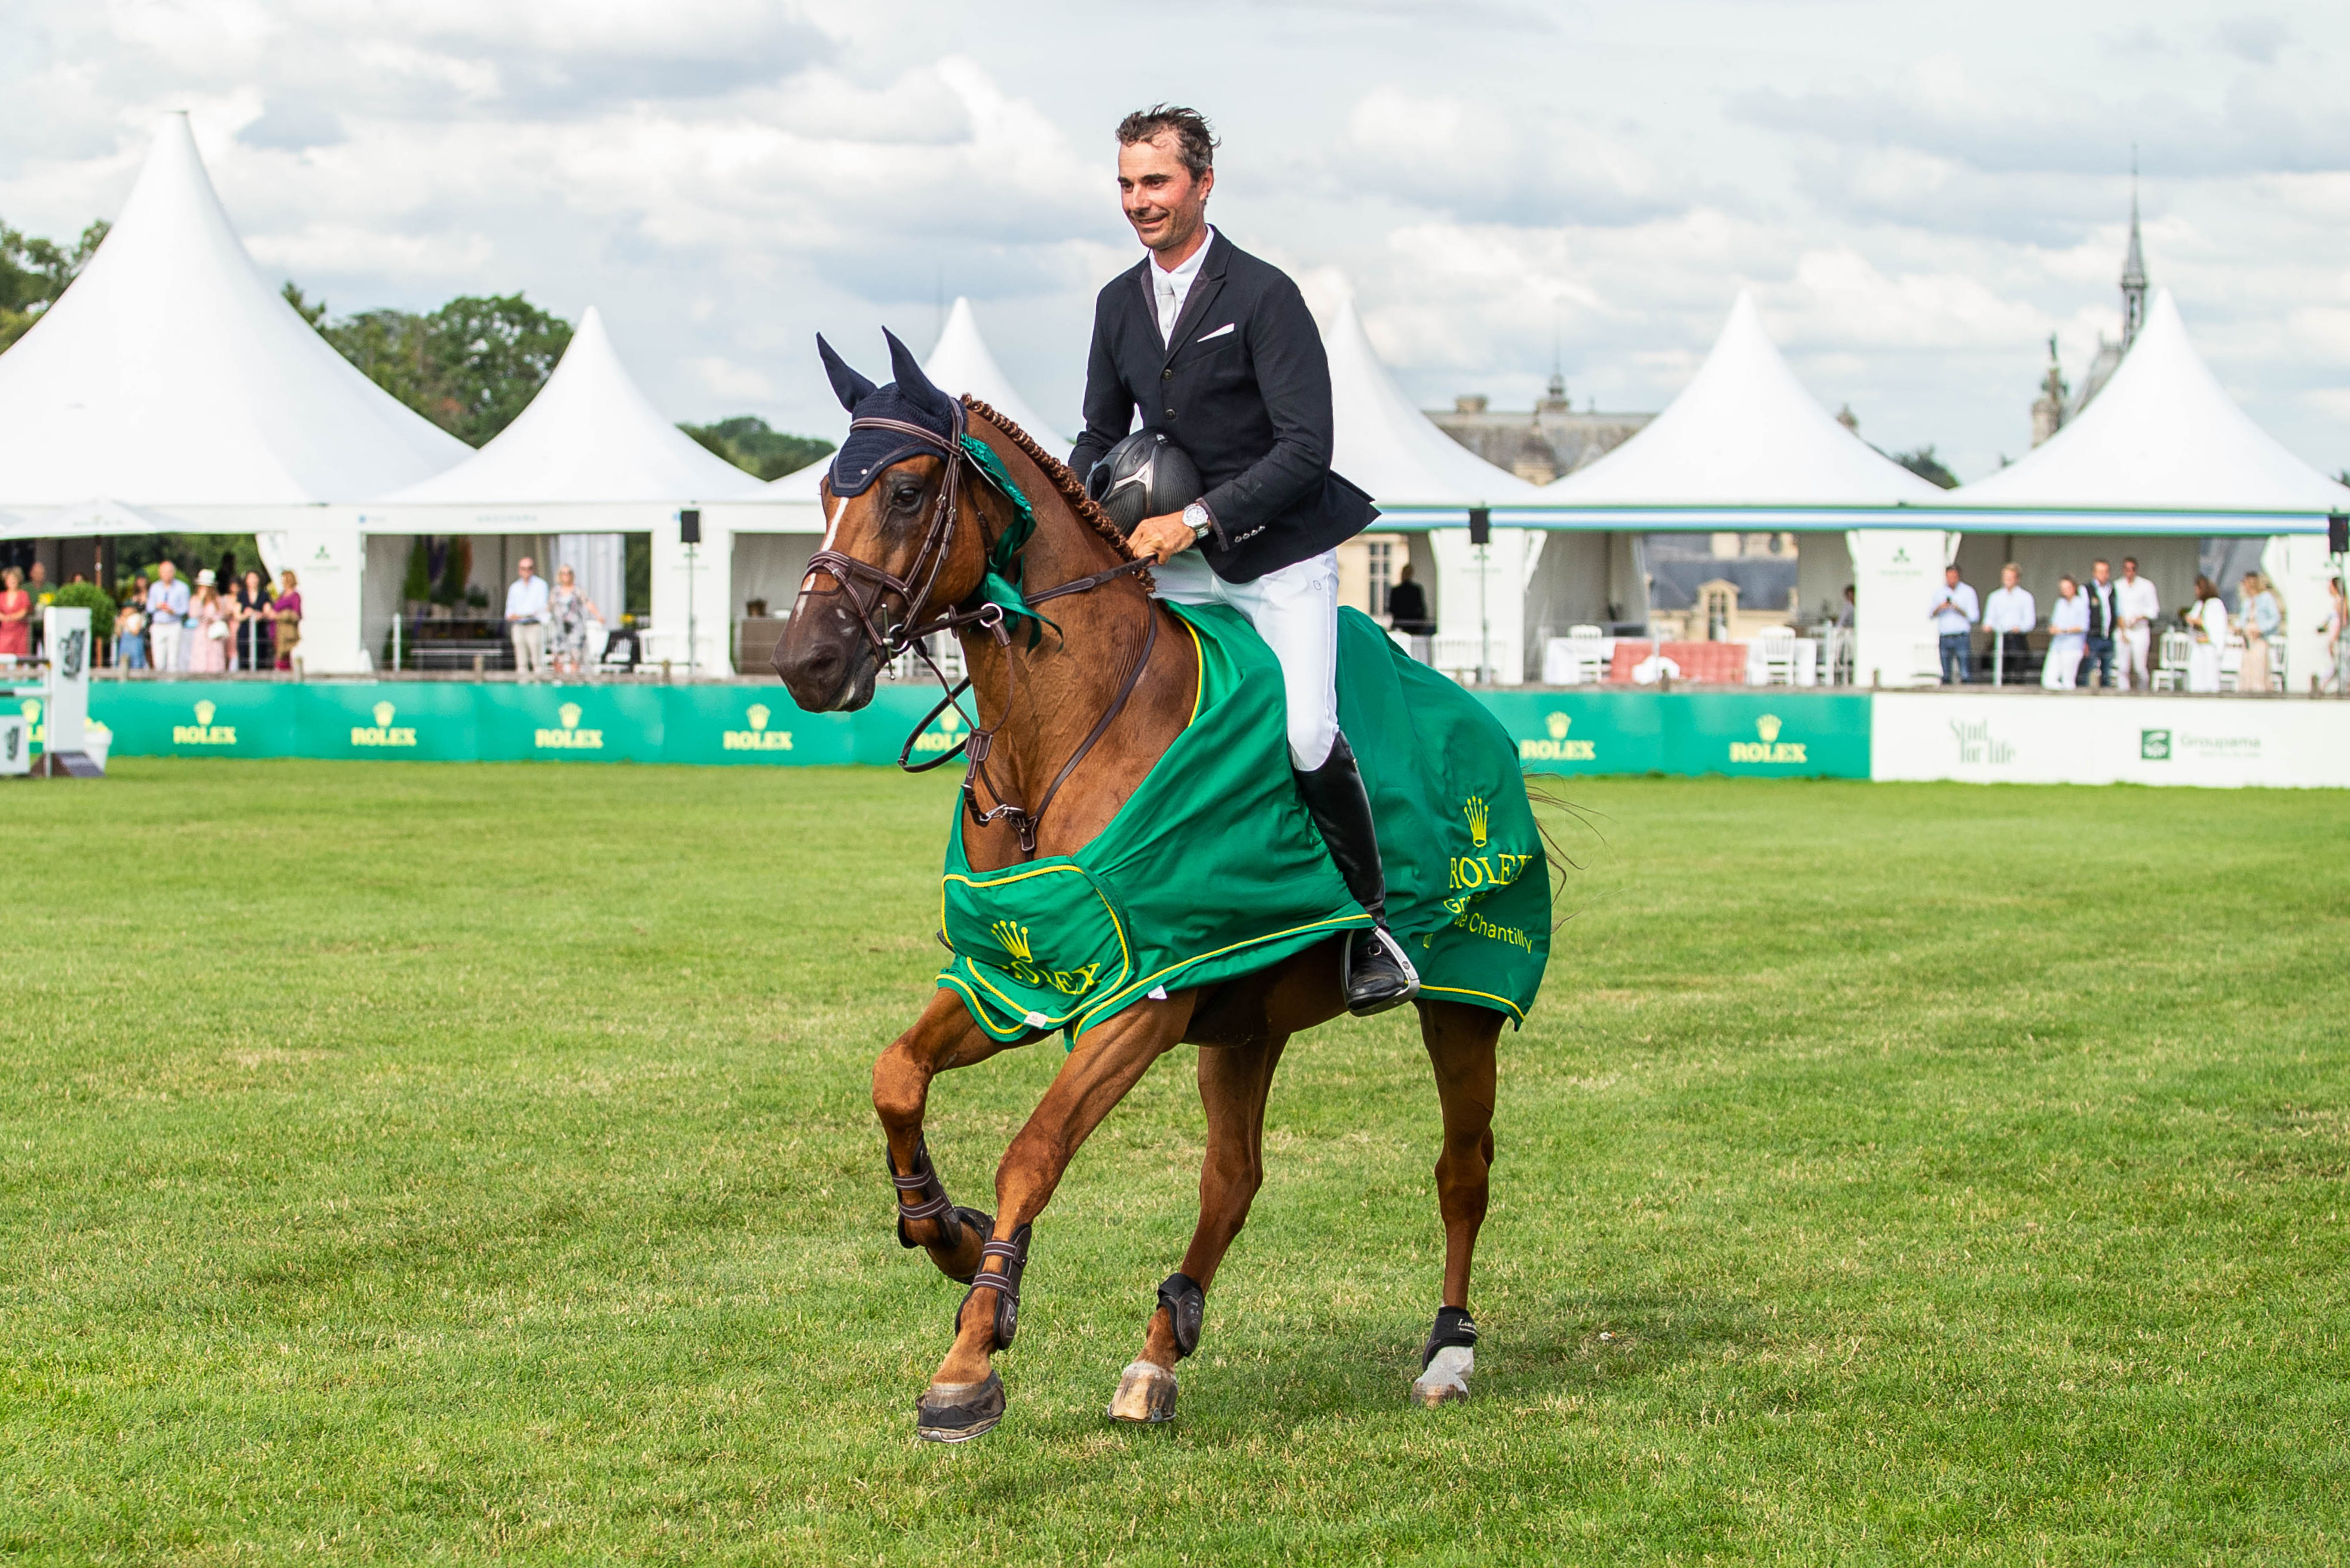 Delmotte wins CSI5* Grand Prix of Chantilly in front of home crowd